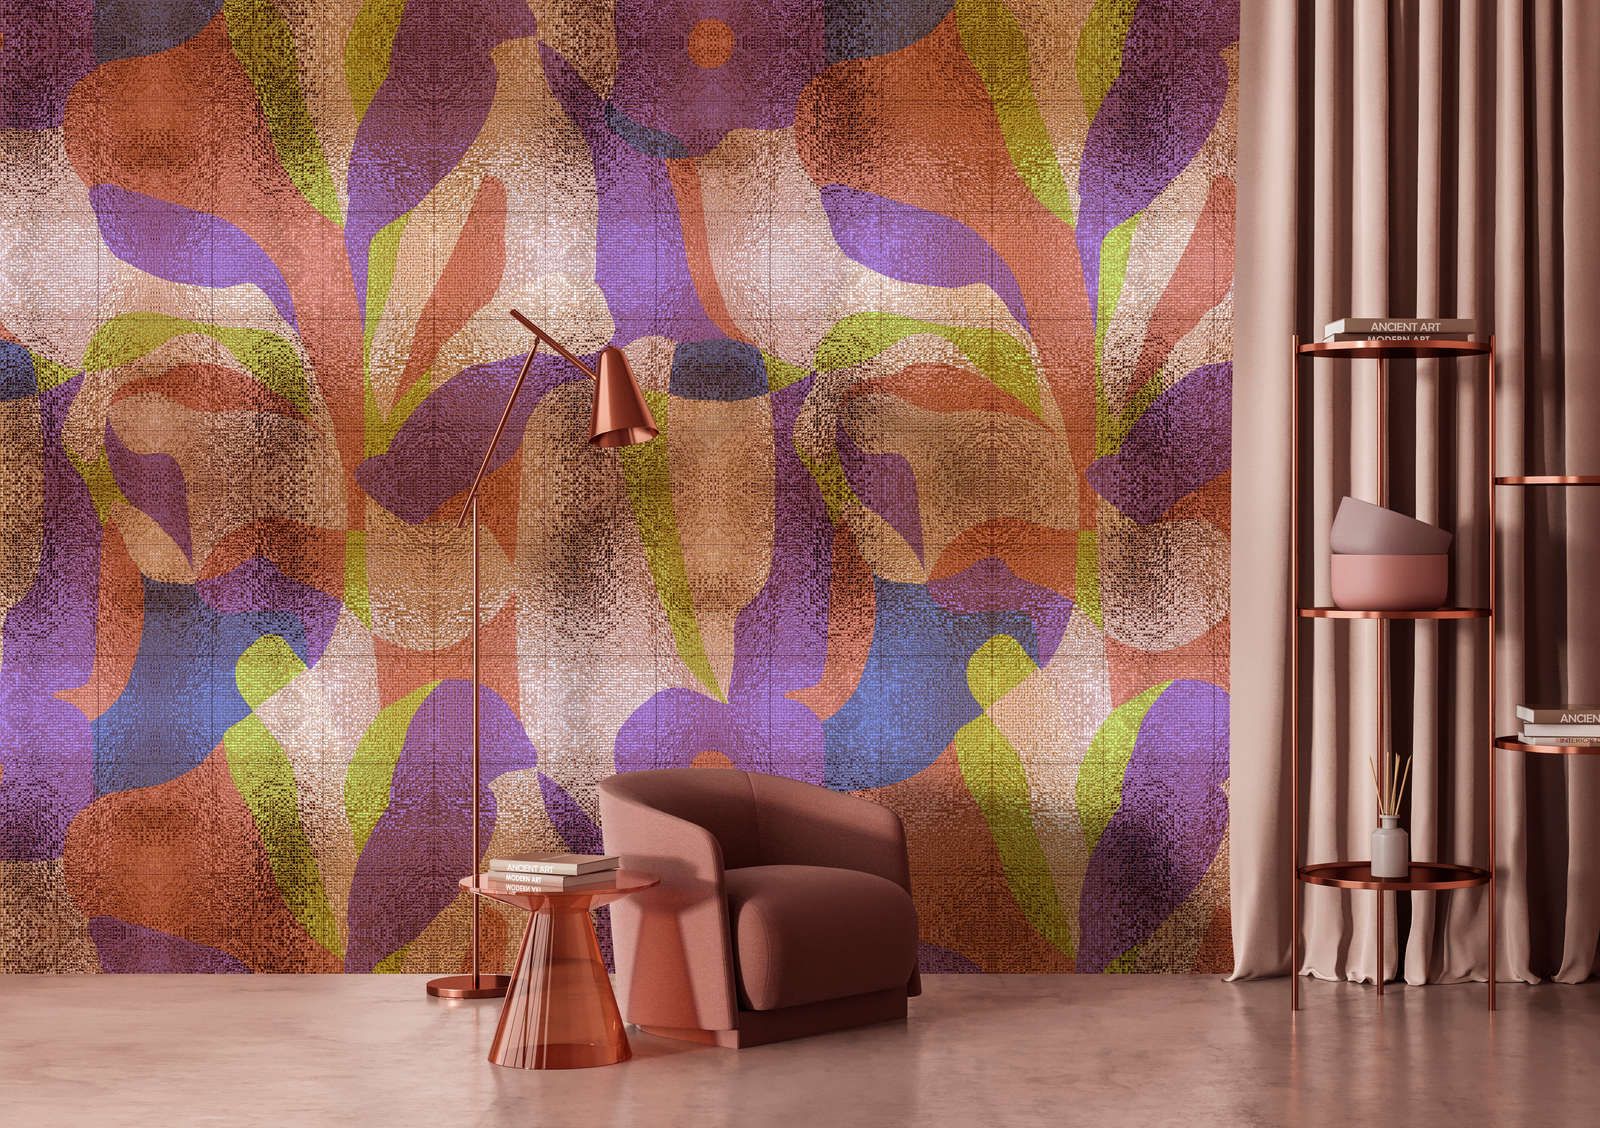             Photo wallpaper »brillanaza« - Graphic, colourful leaf design with mosaic structure - Smooth, slightly pearlescent non-woven fabric
        